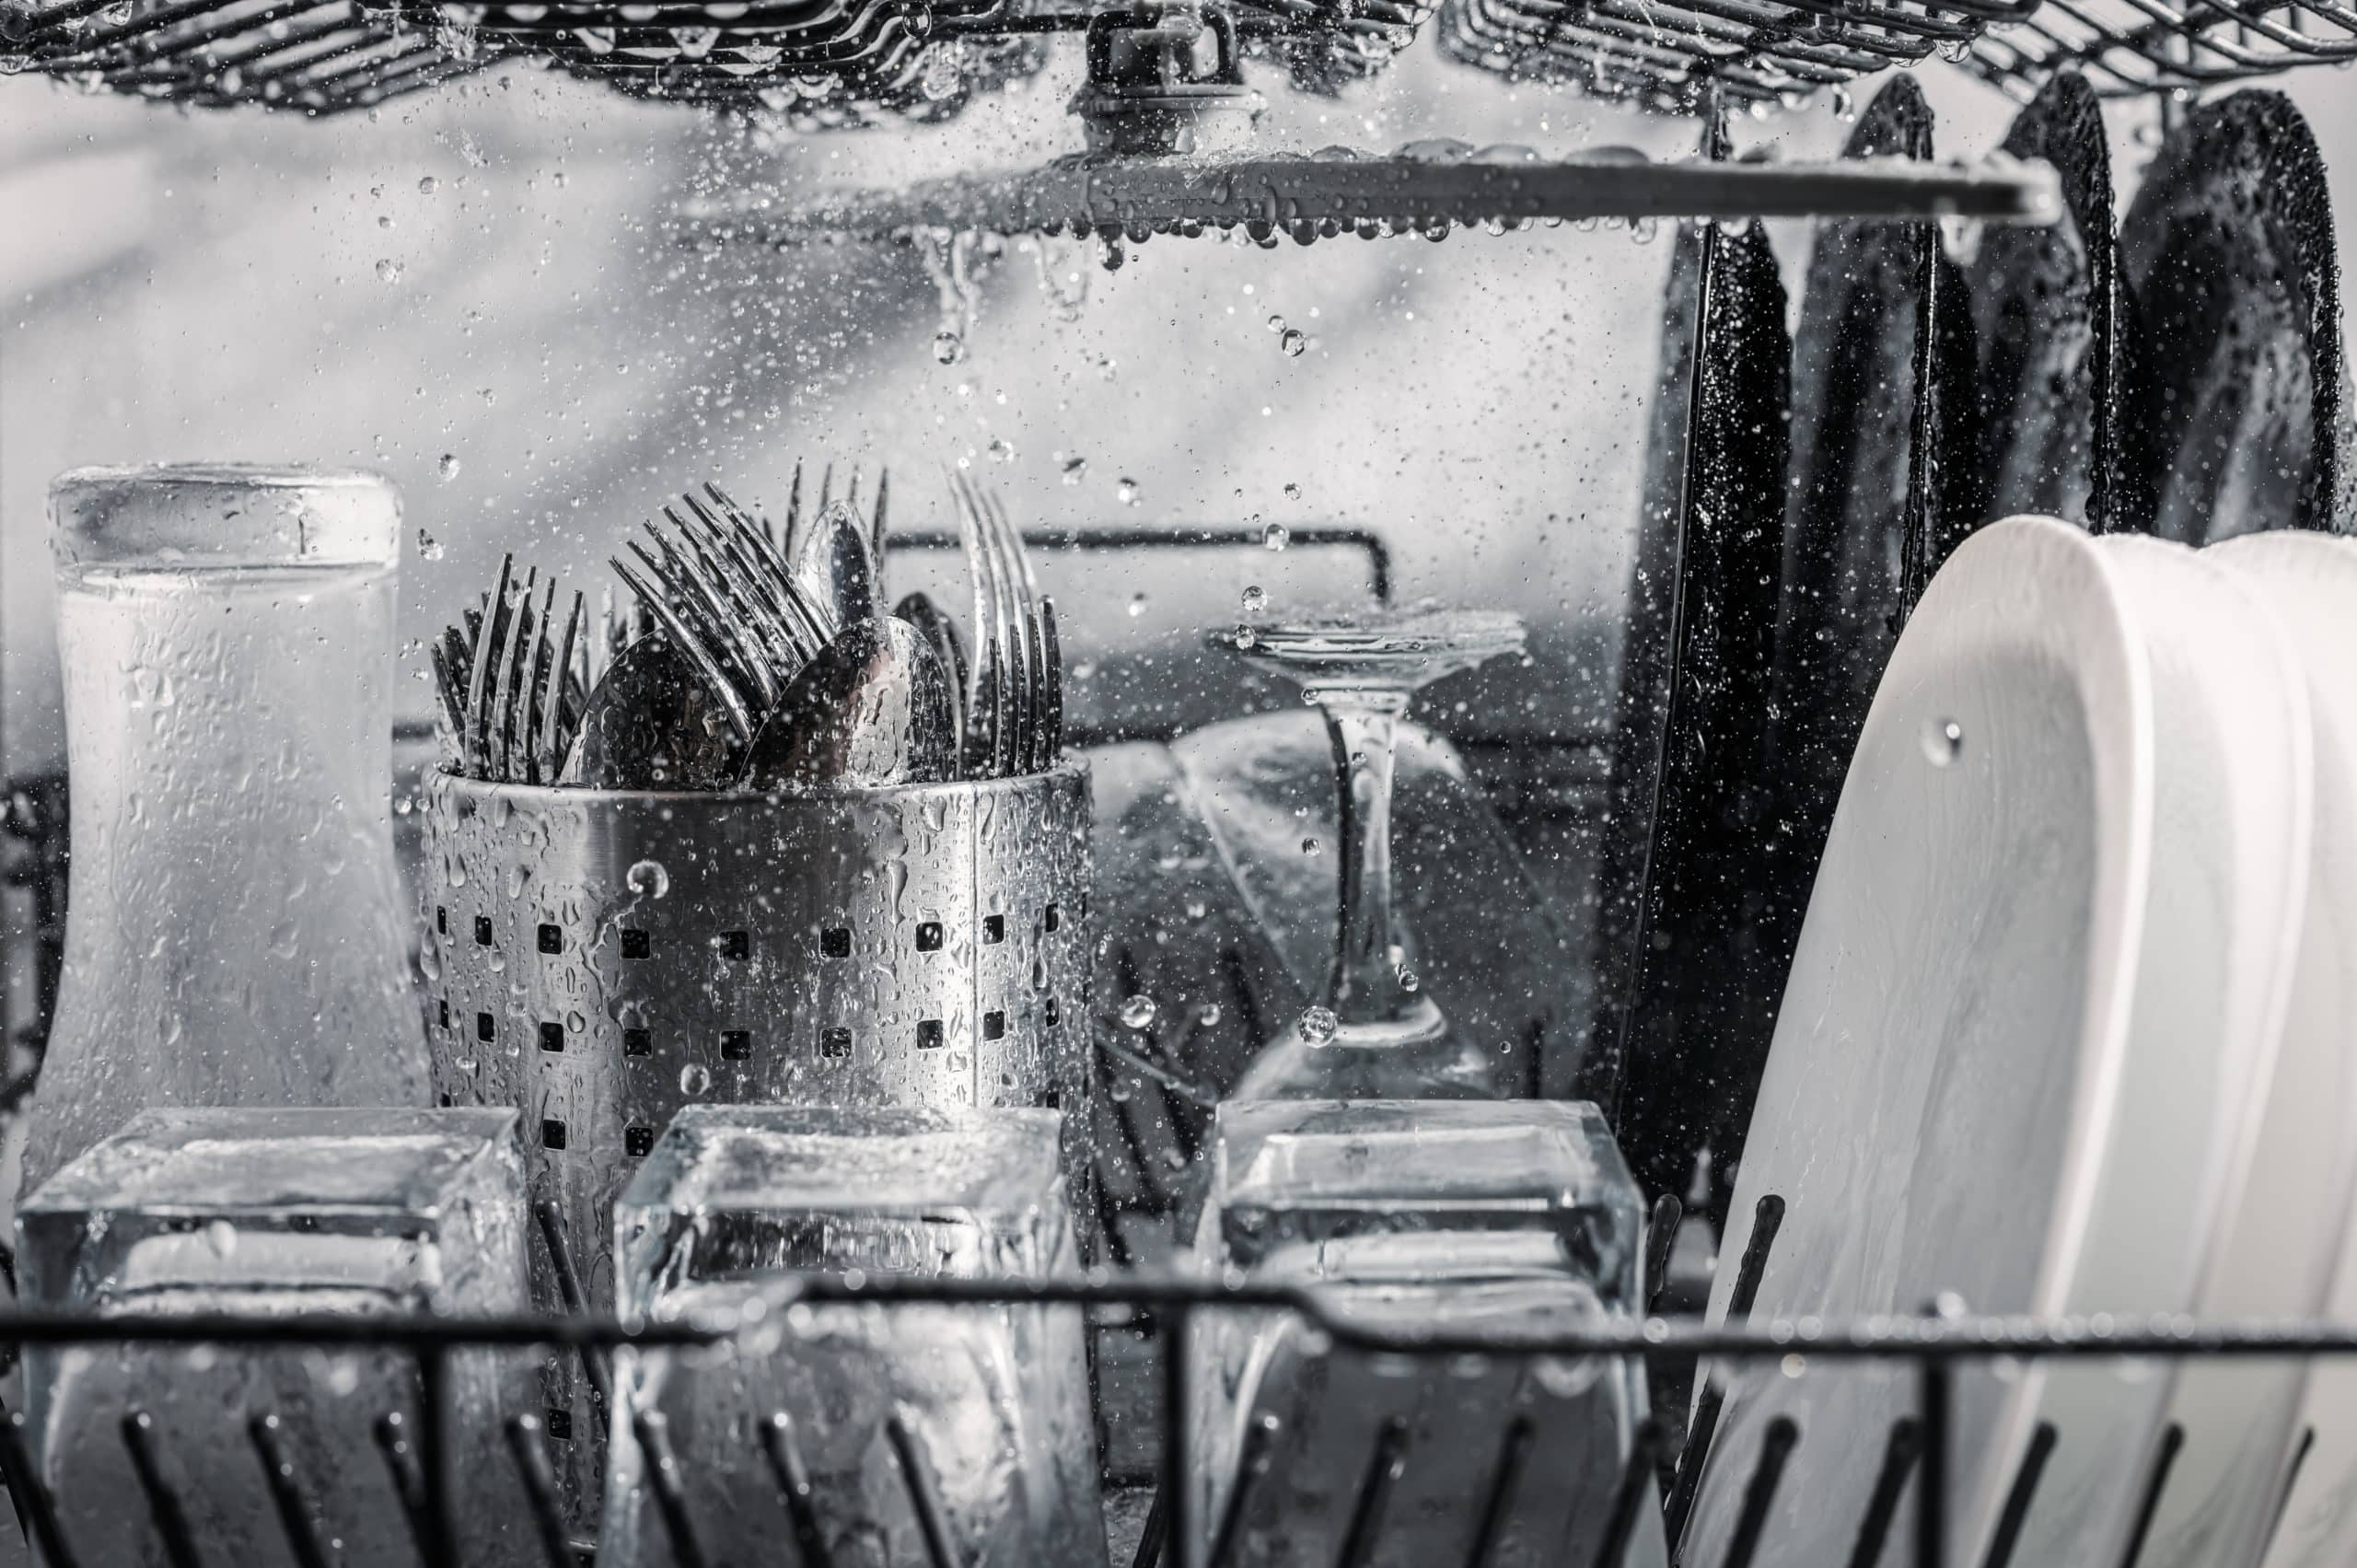 dishes being washed in a dishwasher